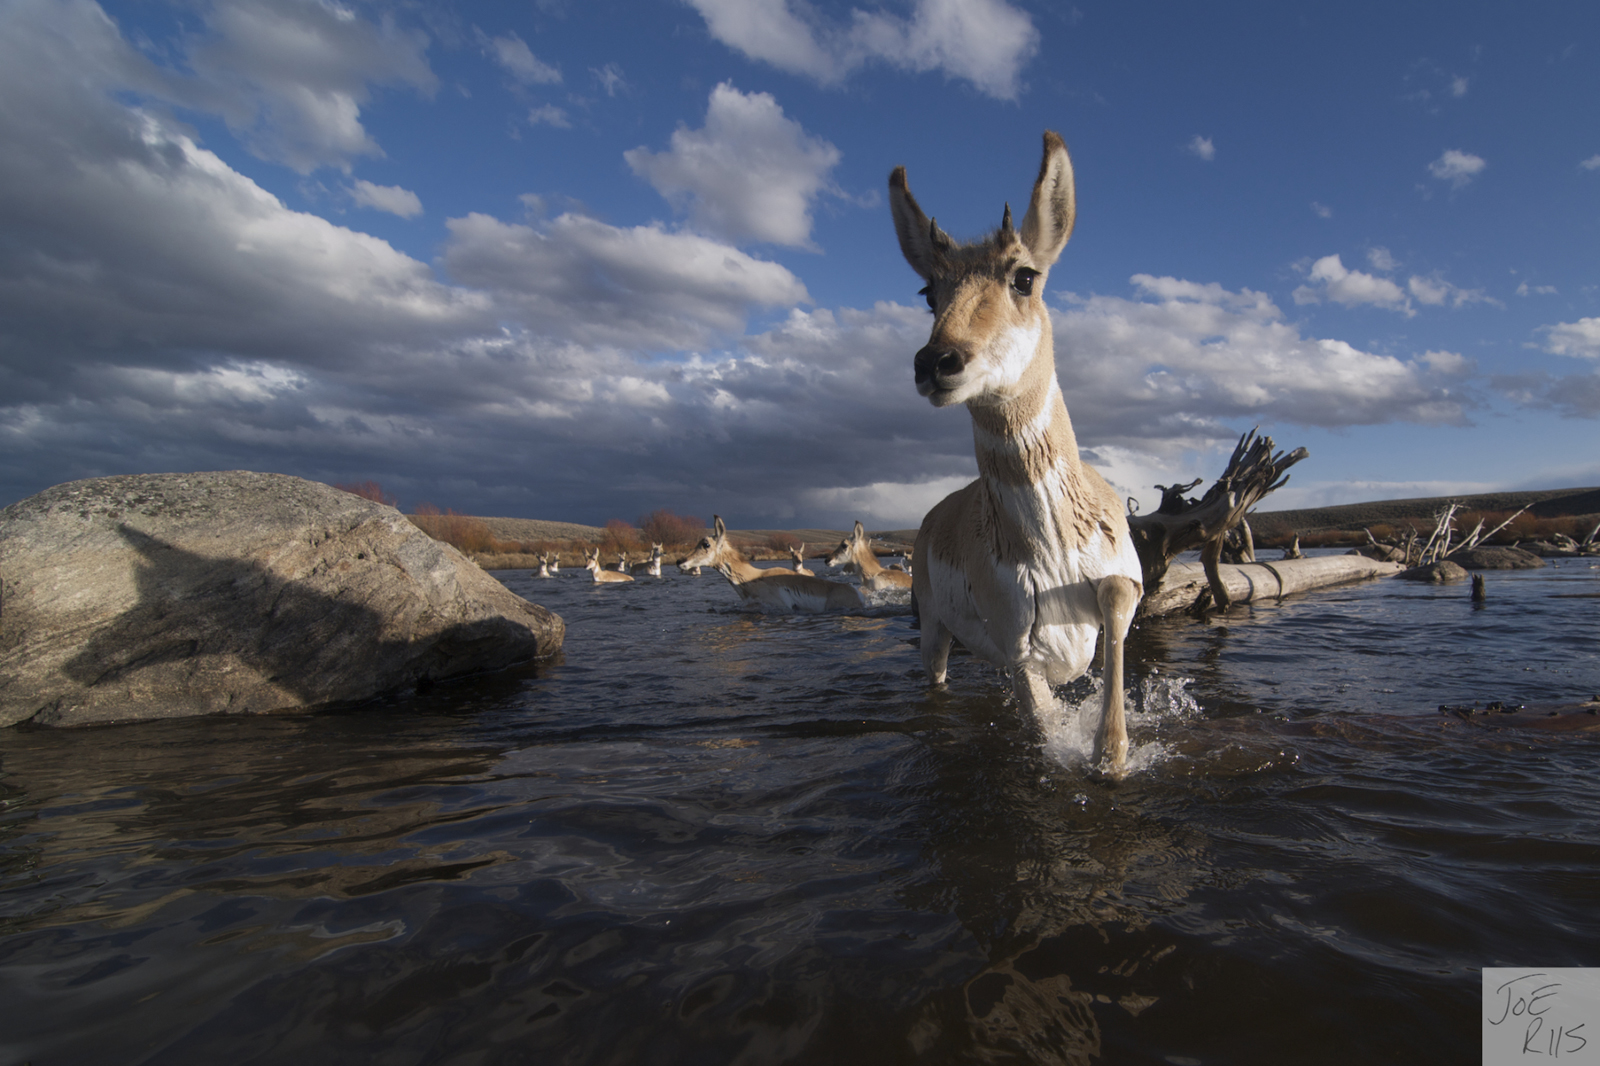 Pronghorn crossing a river during their annual migration. Joe Riis photo.